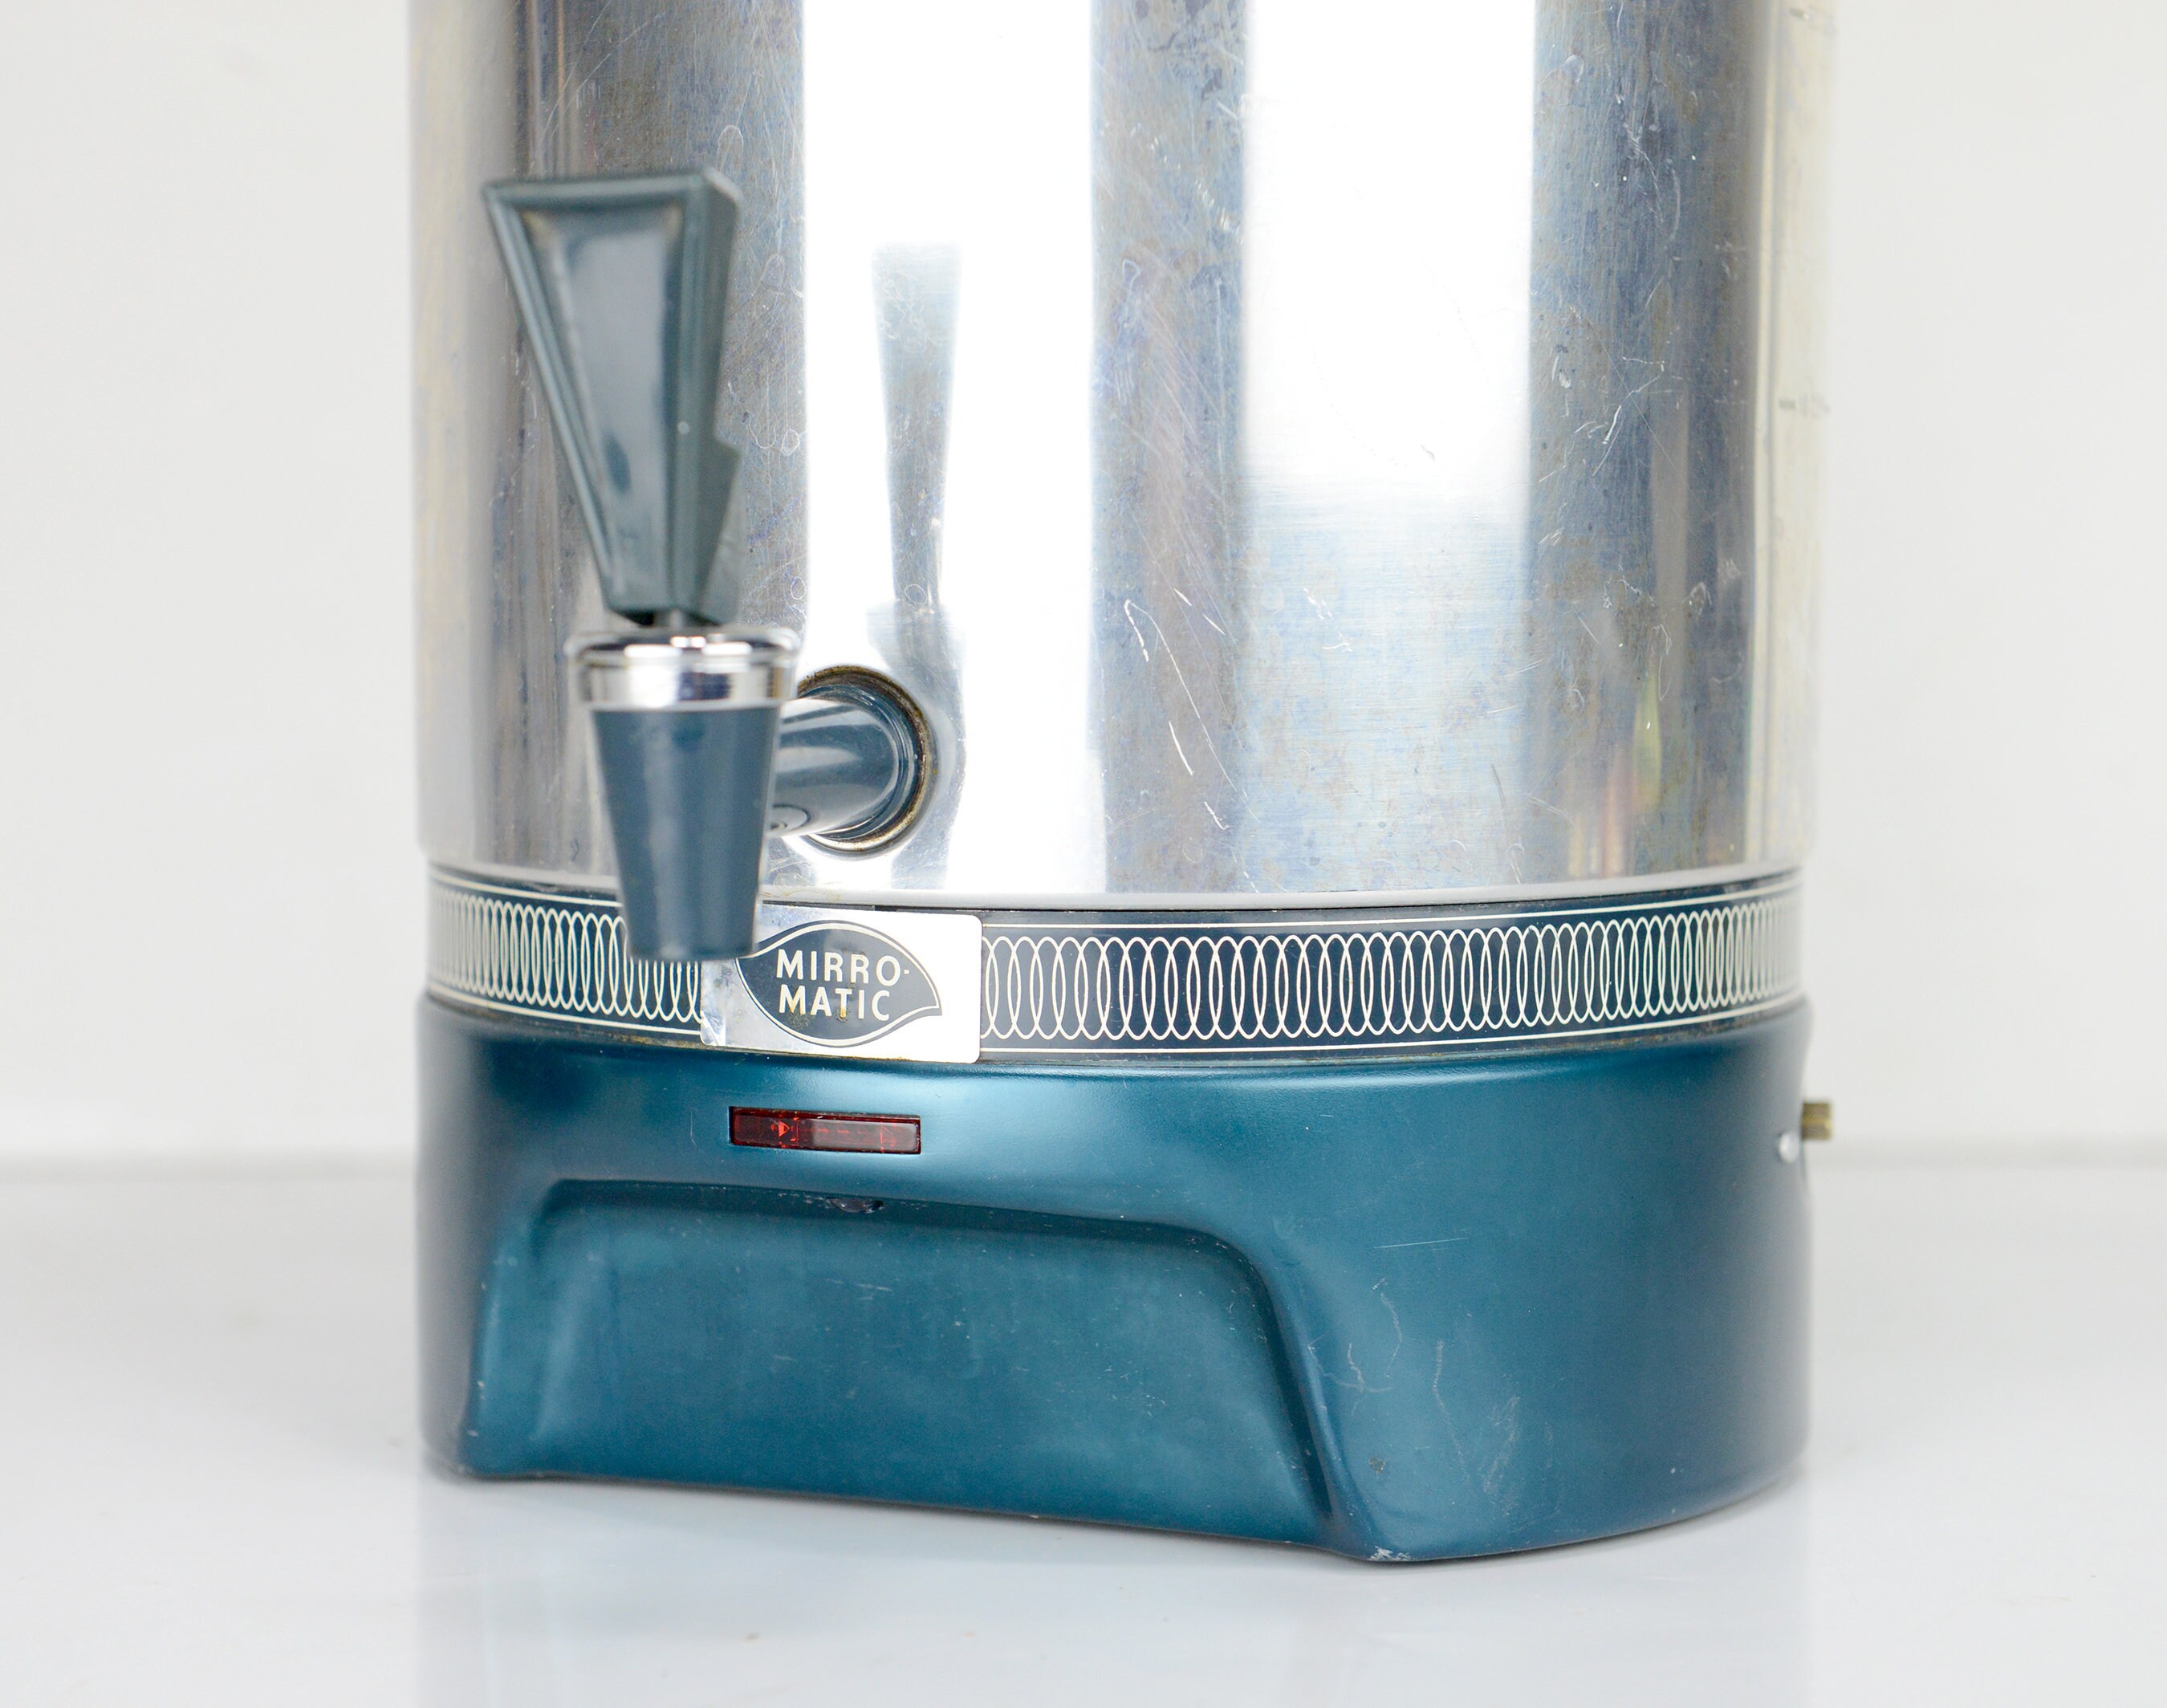 Vintage Mirro Matic Electric Percolator Coffee Pot, 10 Cup, Steel Blue,  Oval Top, 12, 1960's B85-8-28 